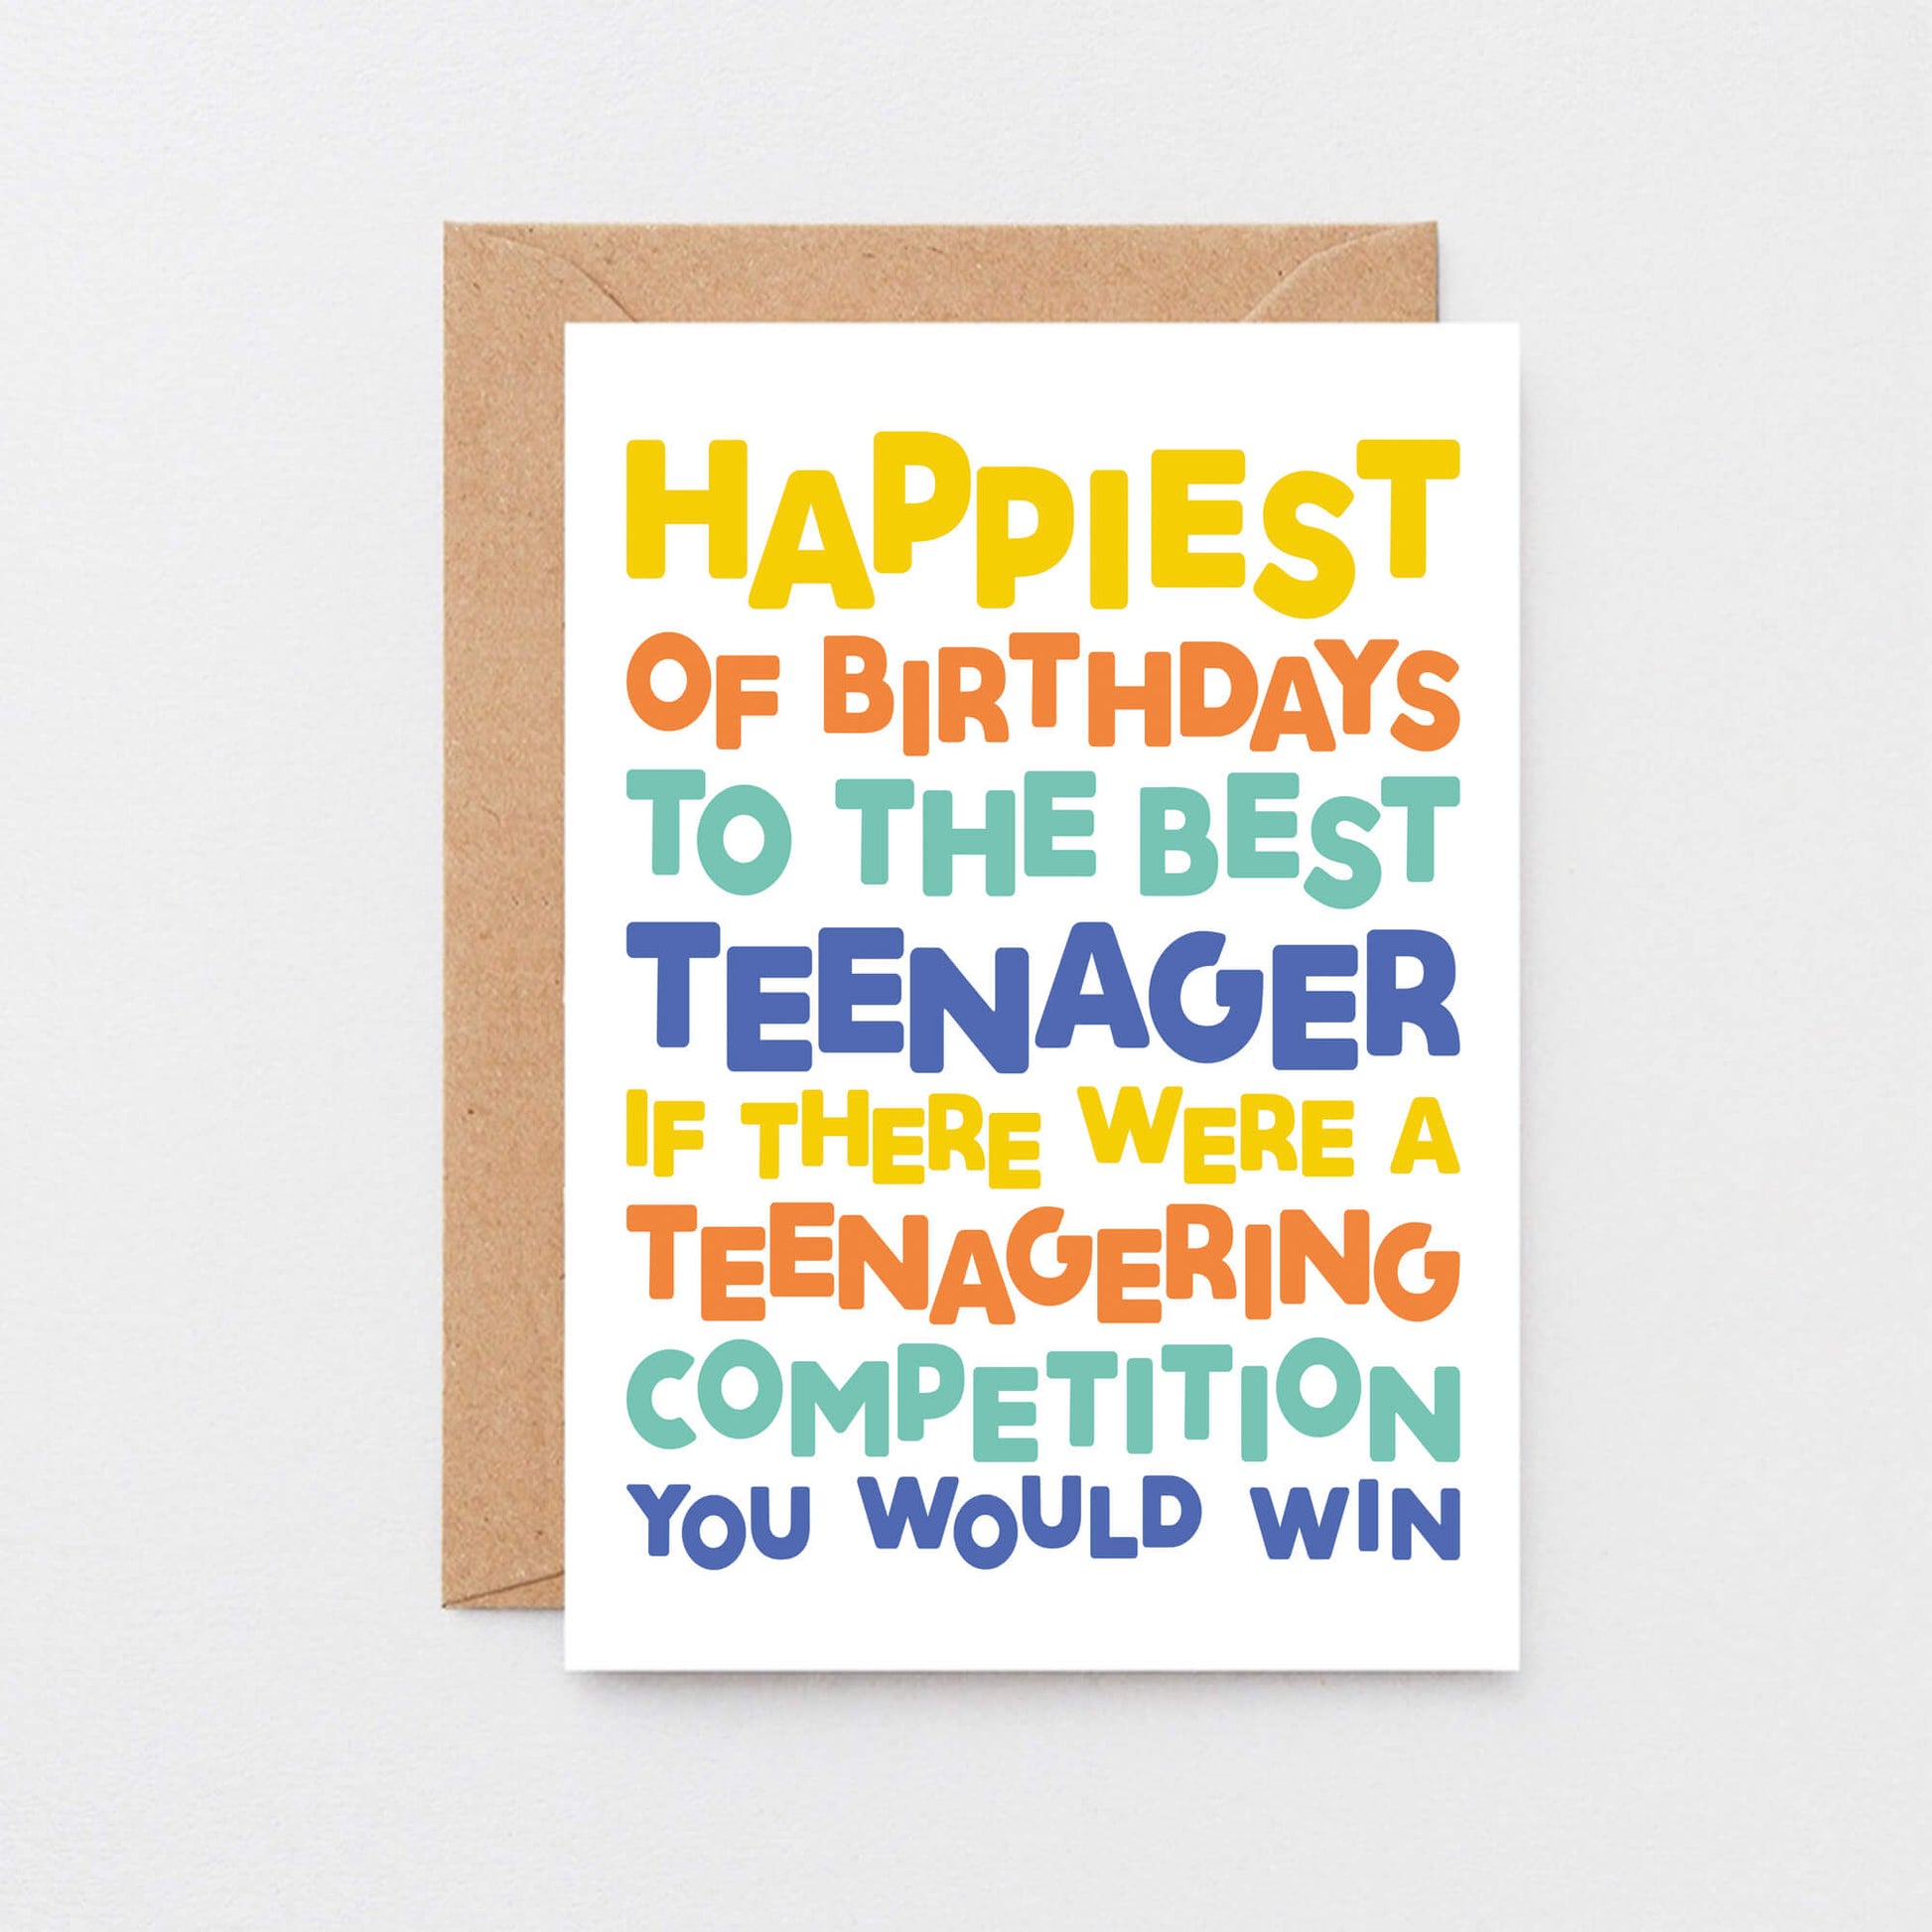 Teenager Birthday Card by SixElevenCreations. Reads Happiest of birthdays to the best teenager. If there were a teenagering competition you would win. Product Code SE0713A6